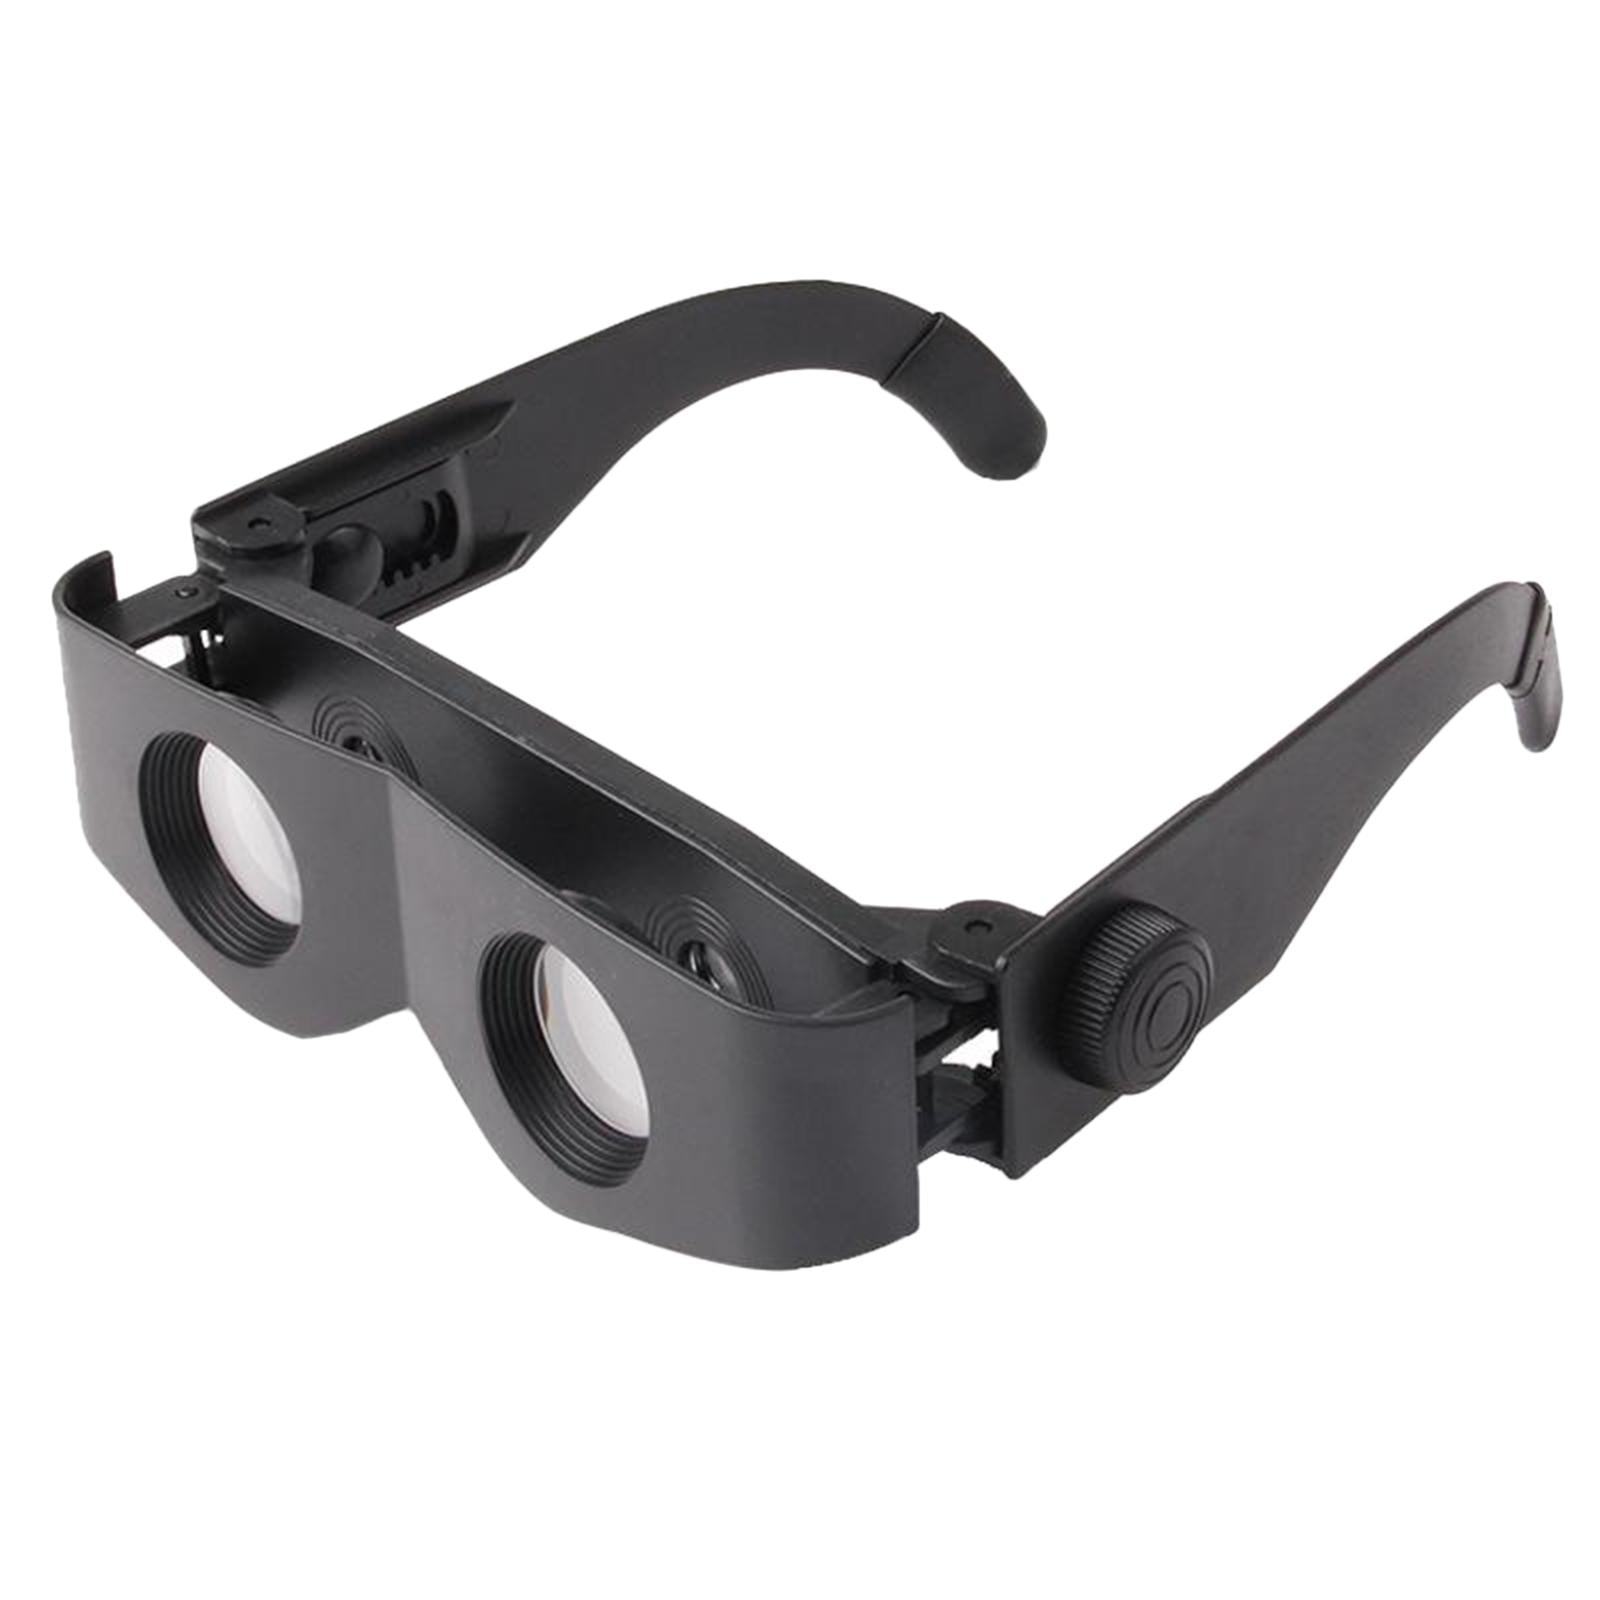 Fishing Glasses Adjustable Zoom Fishing Telescope Magnifier for Concerts  Viewing